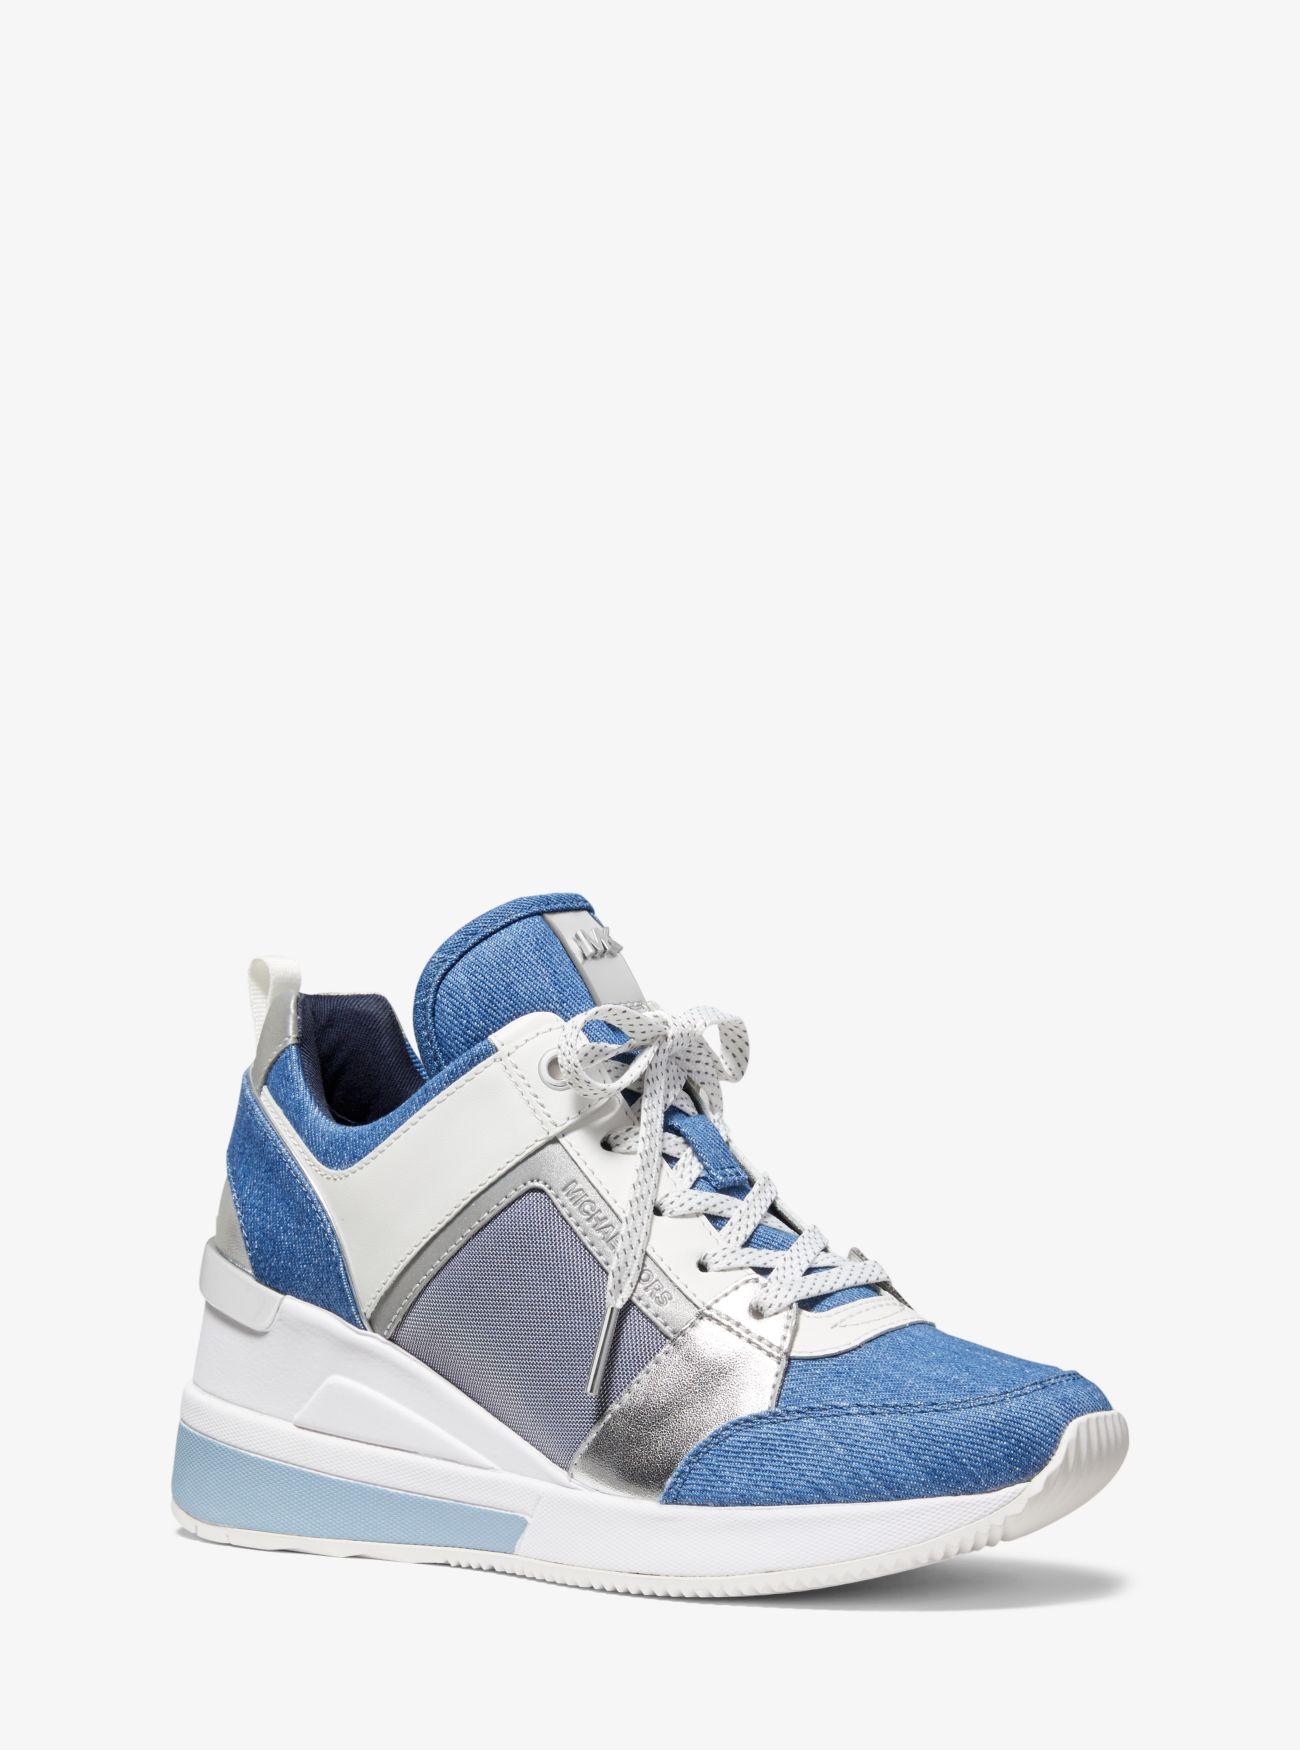 Michael Kors Georgie Denim And Leather Trainer in Blue | Lyst